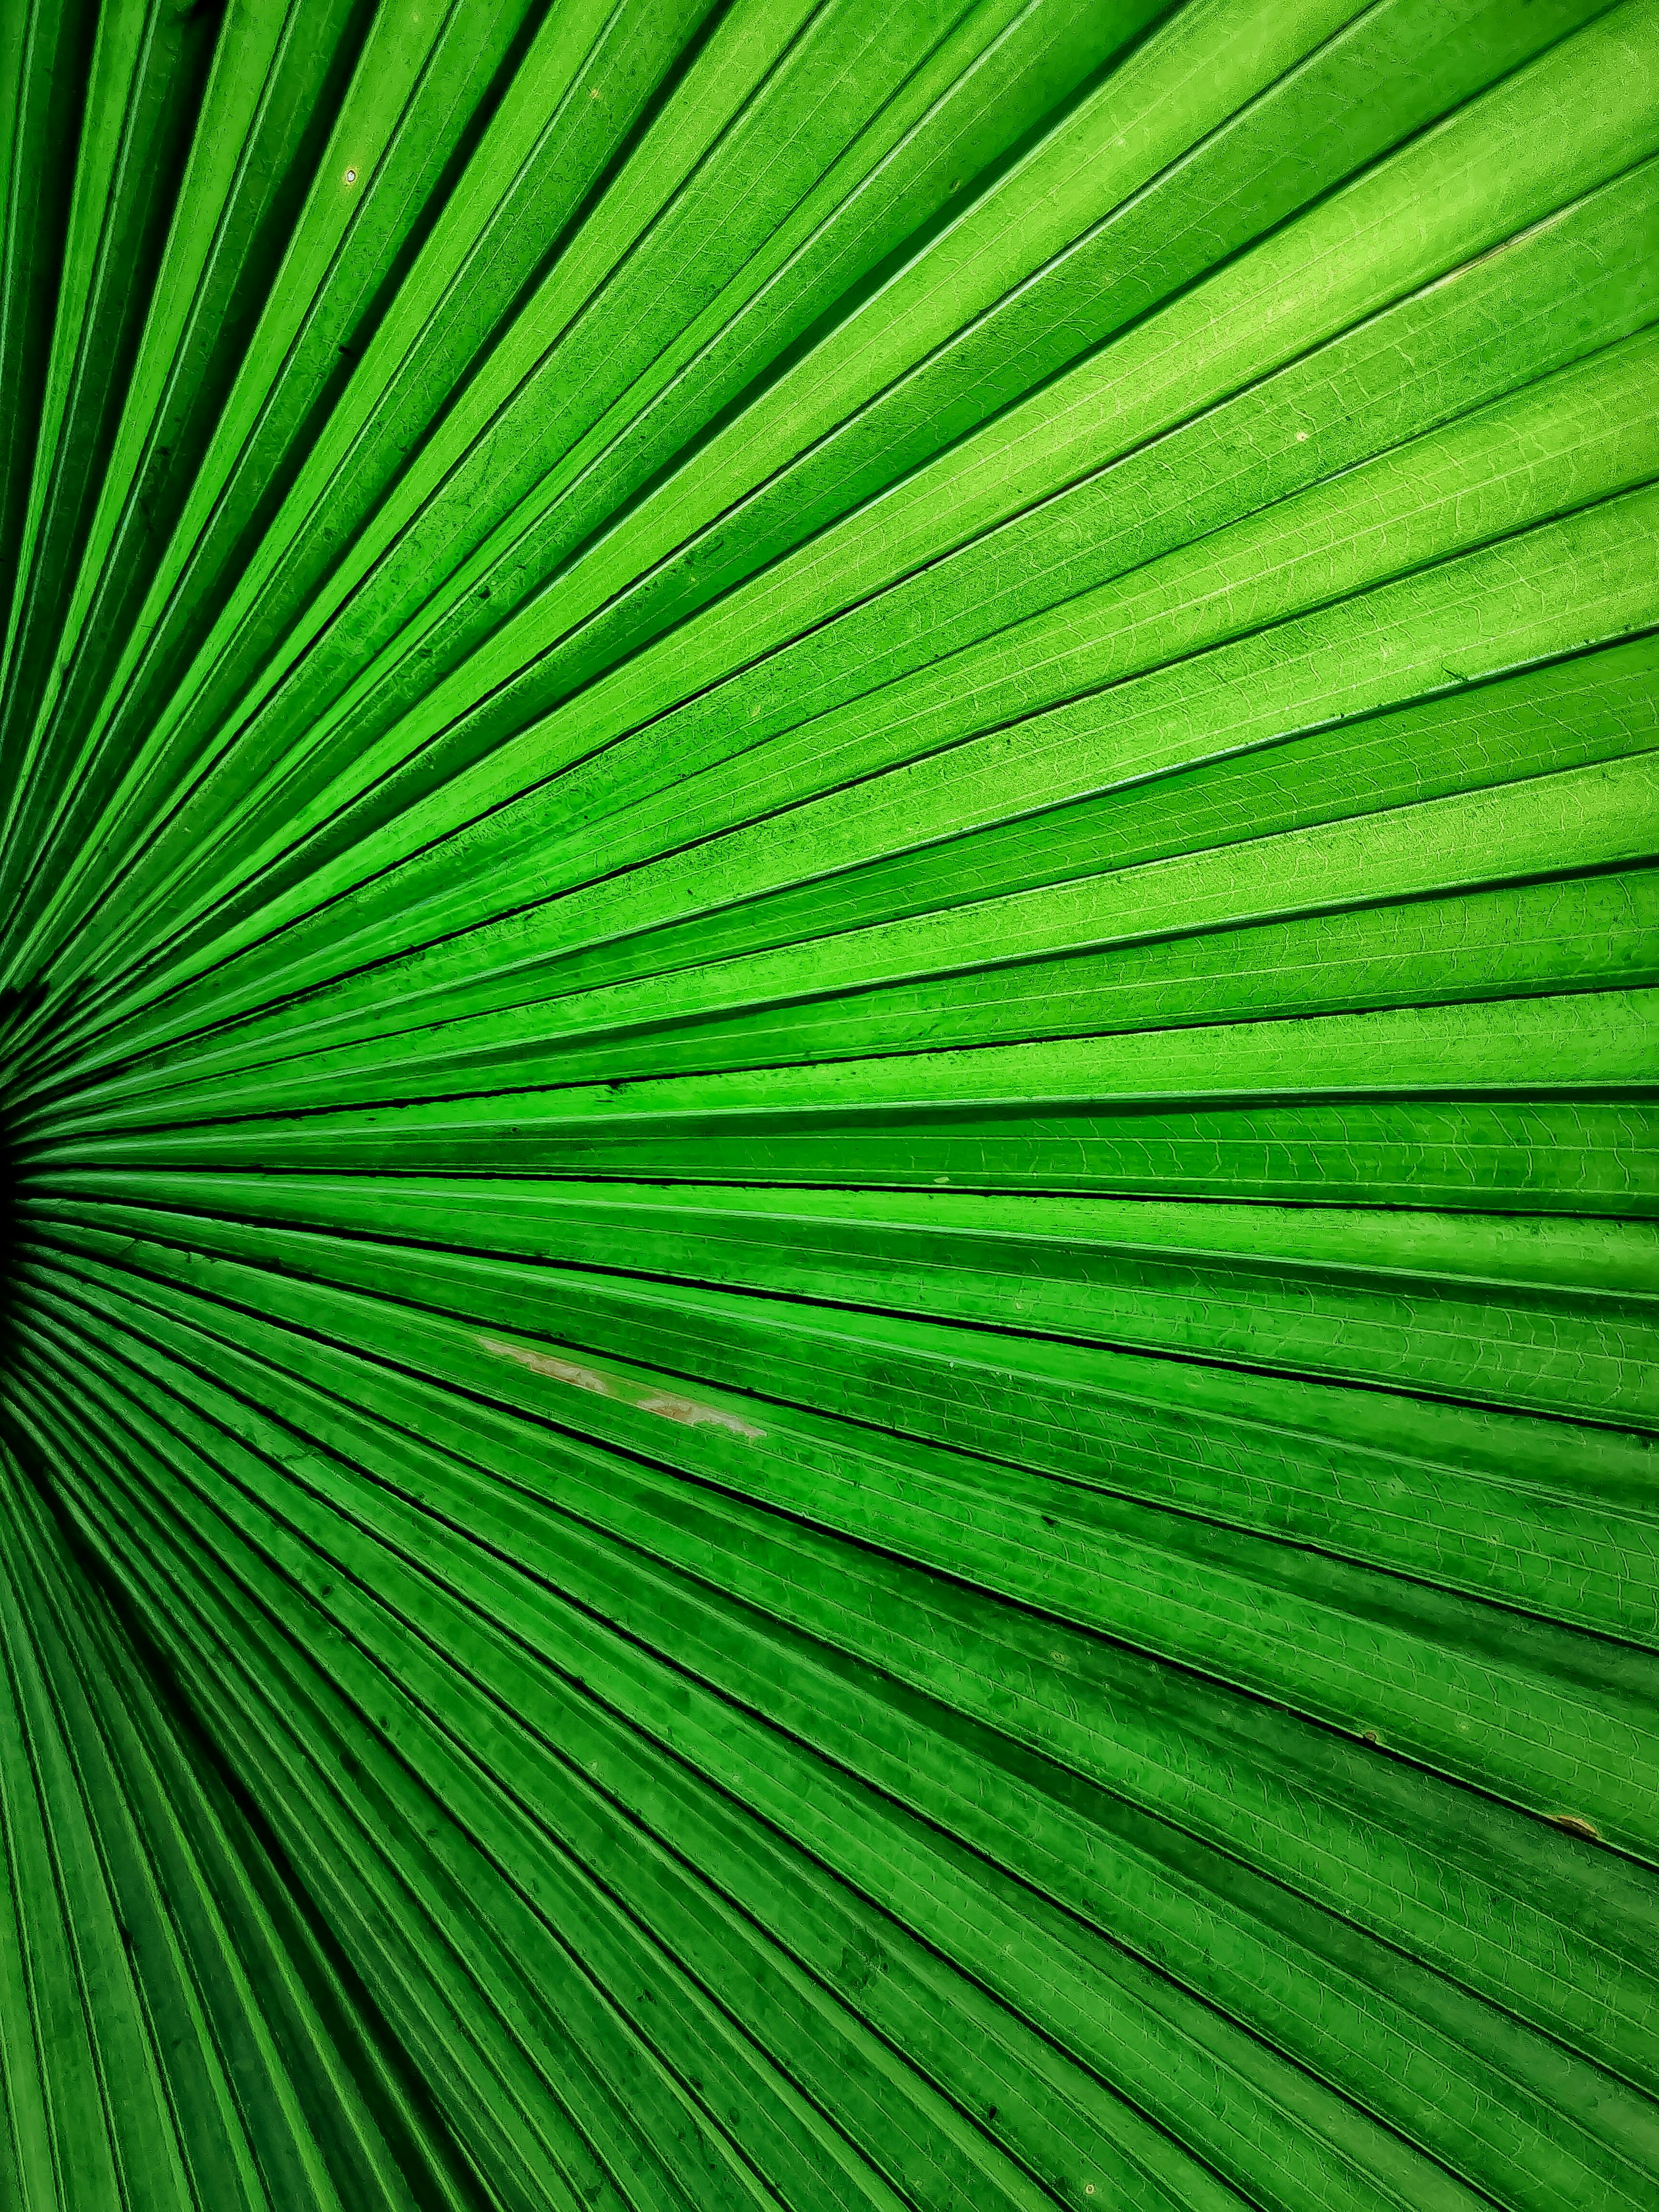 Leaf Texture Photos, Download The BEST Free Leaf Texture Stock Photos & HD  Images